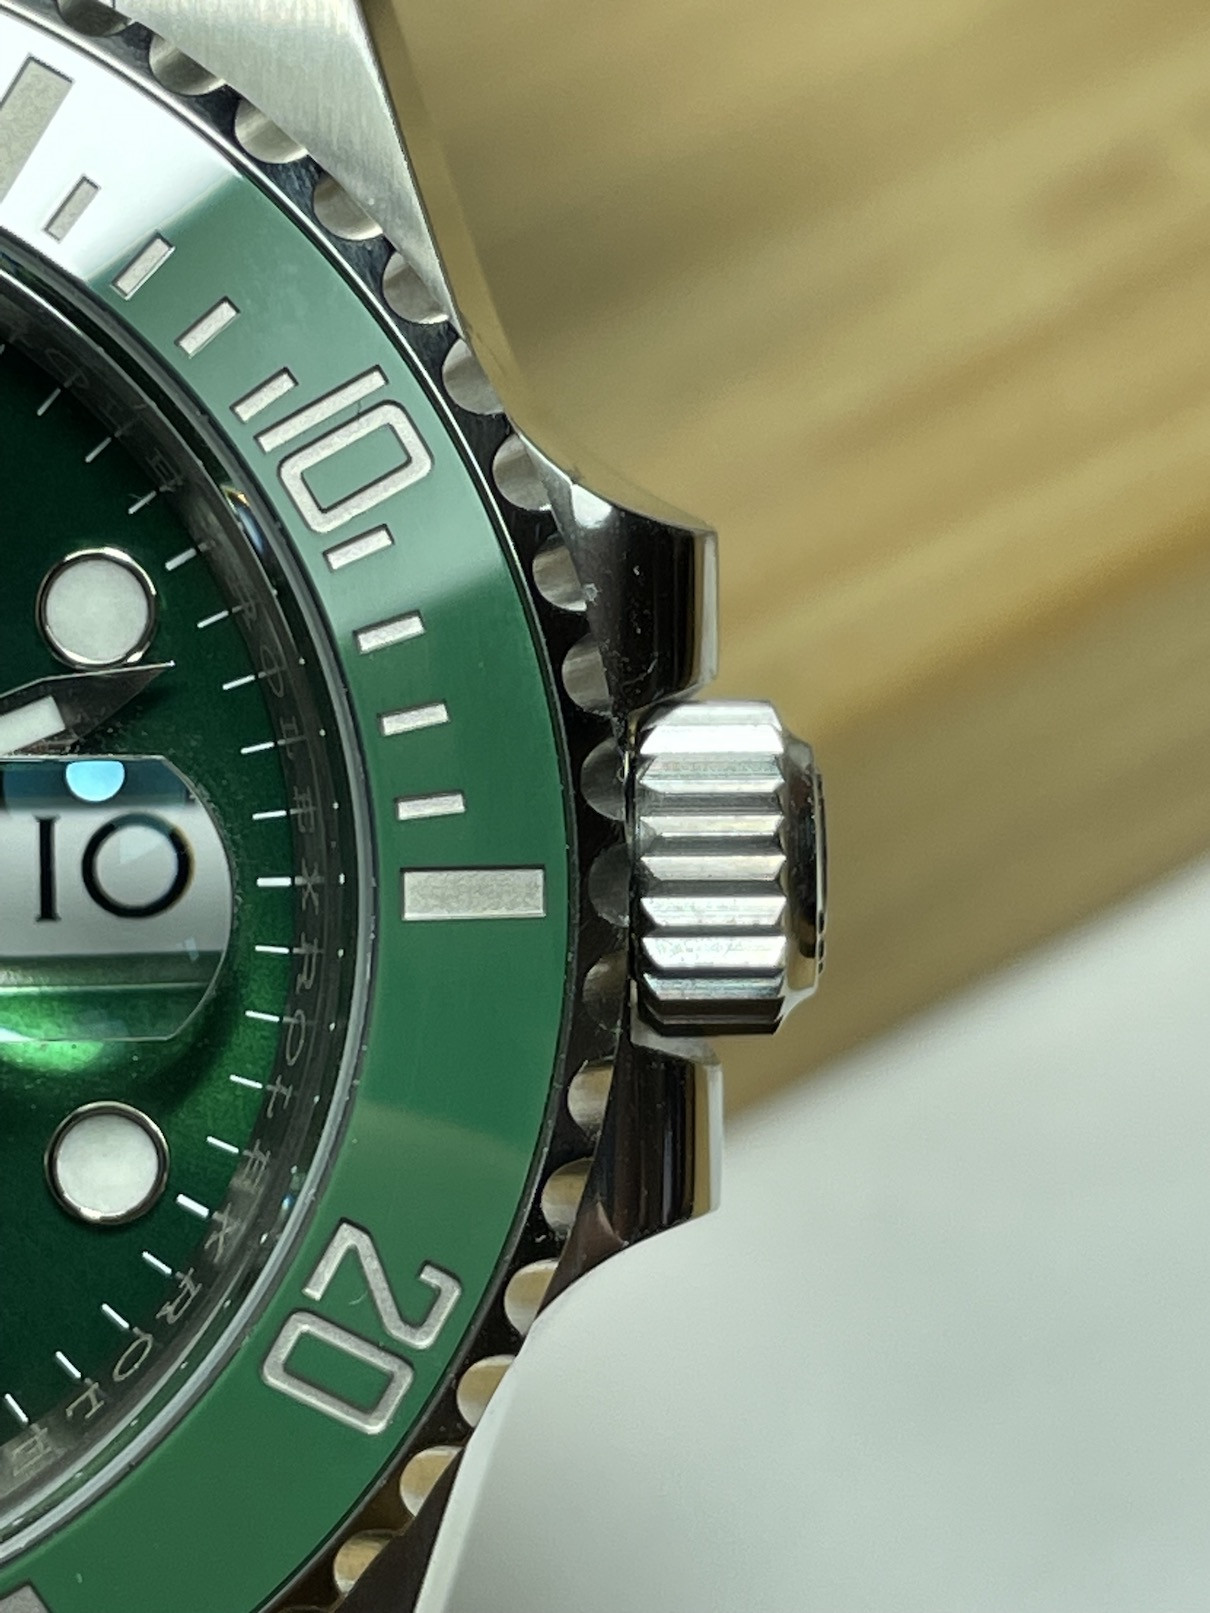 WTS] (Unknown Factory) Rolex Submariner Hulk [originally posted by